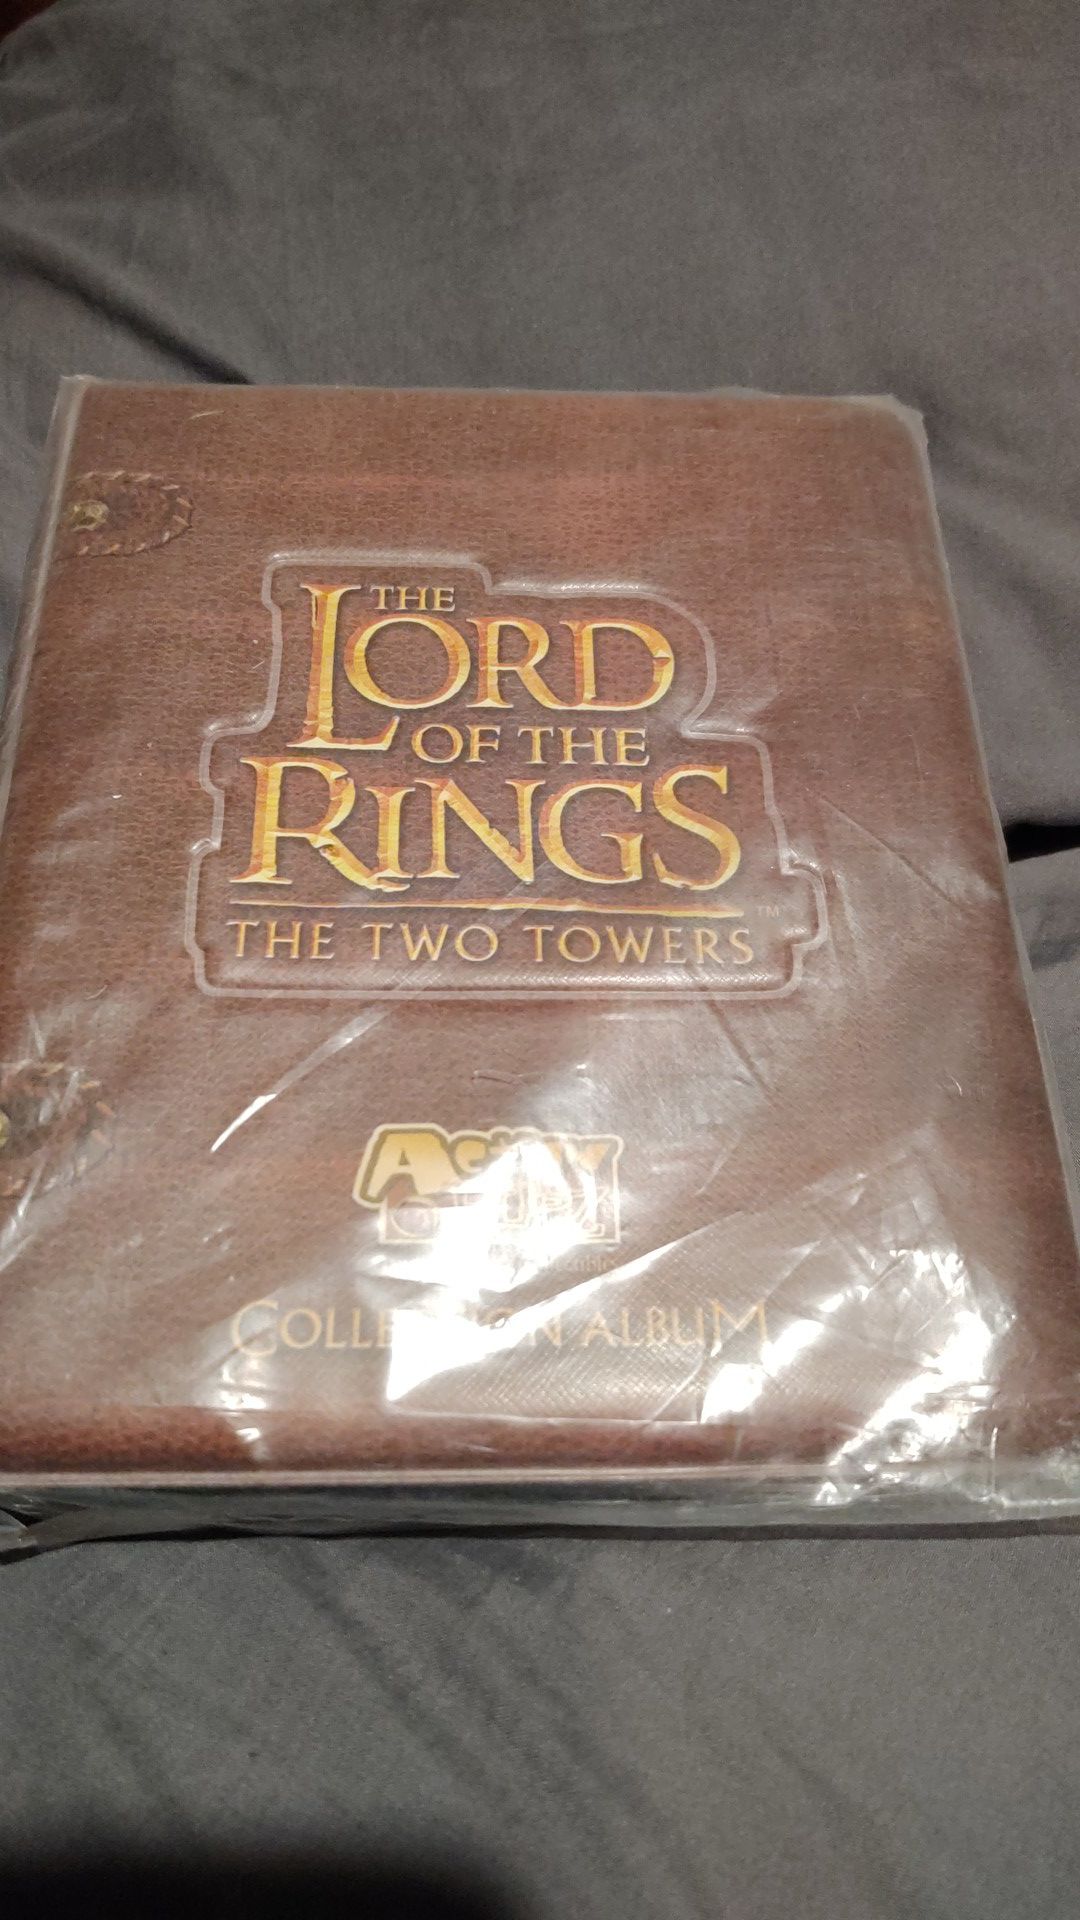 The Lord of the Rings The two towers collection album